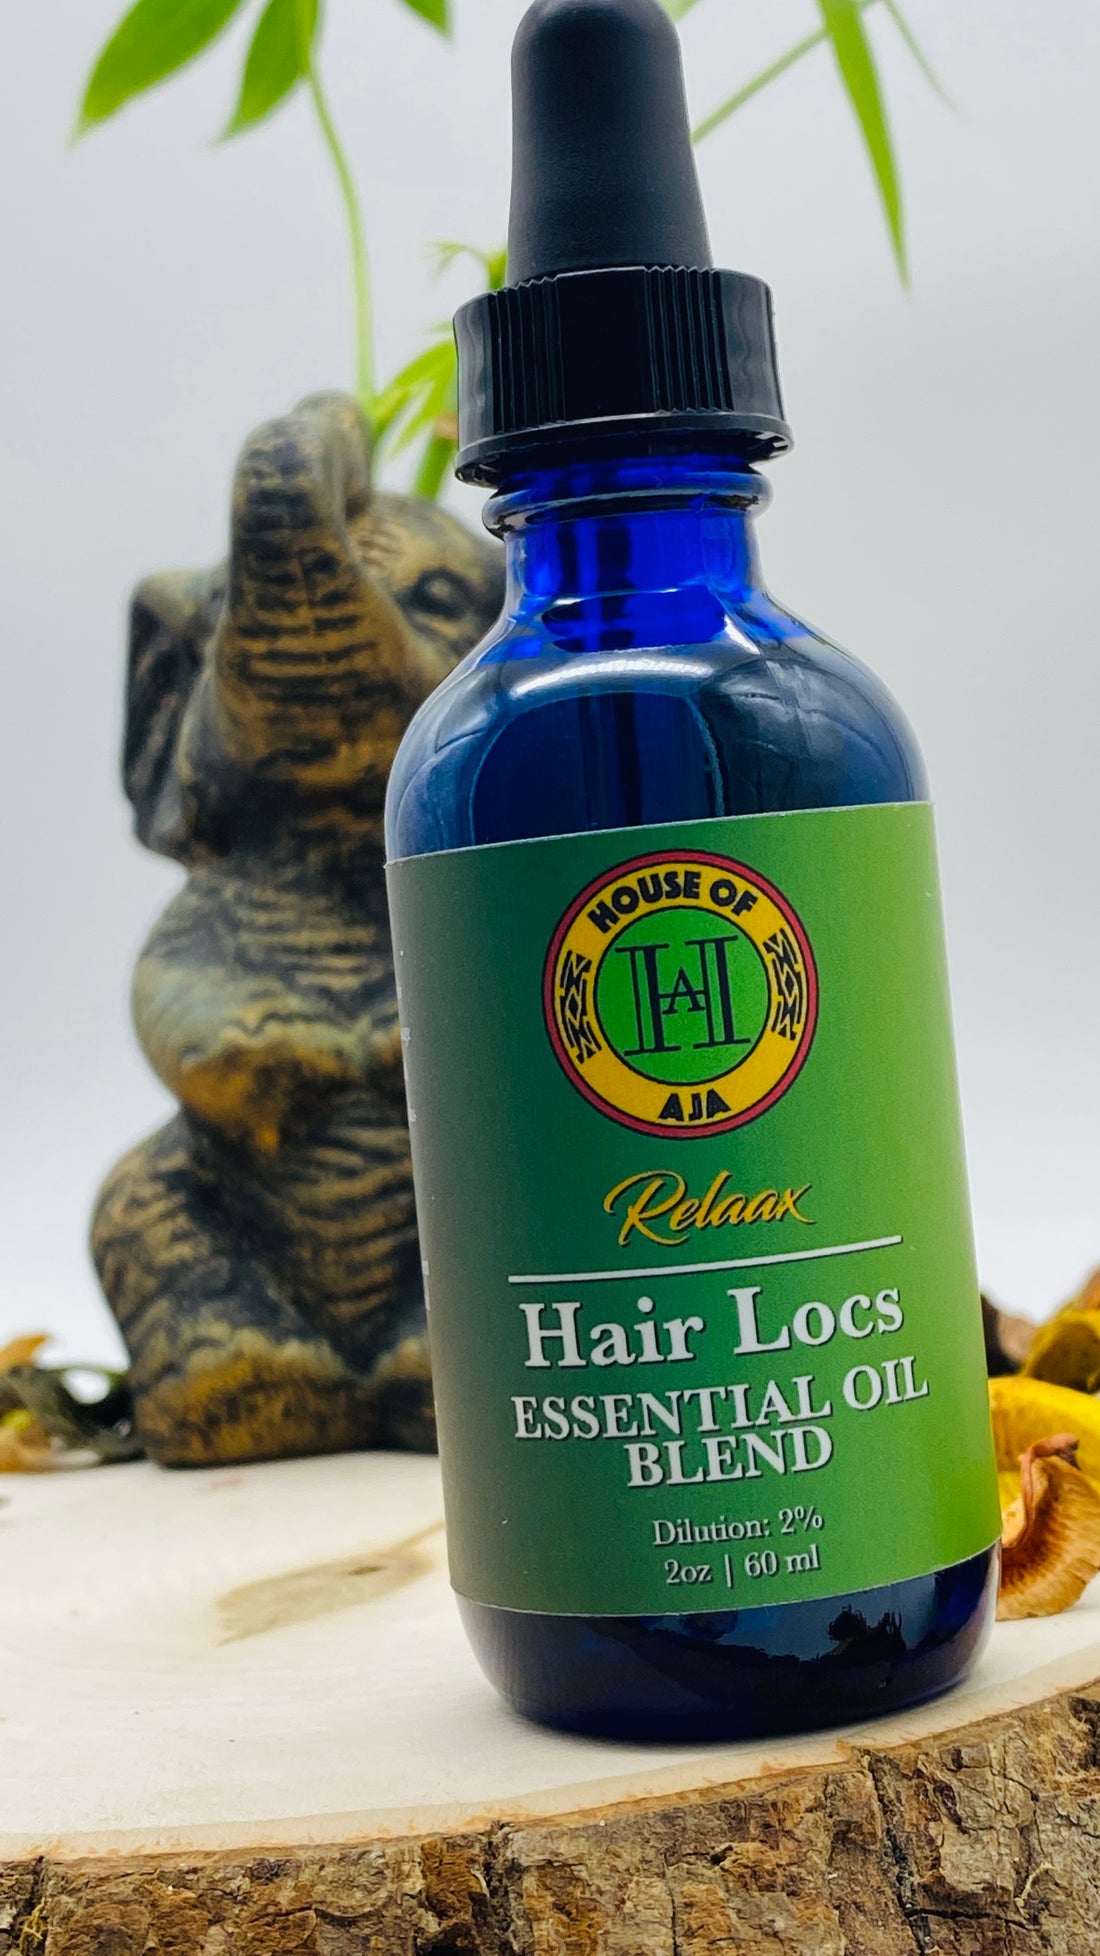 Hair Locs Relaax Essential Oil Blend, by House of Aja